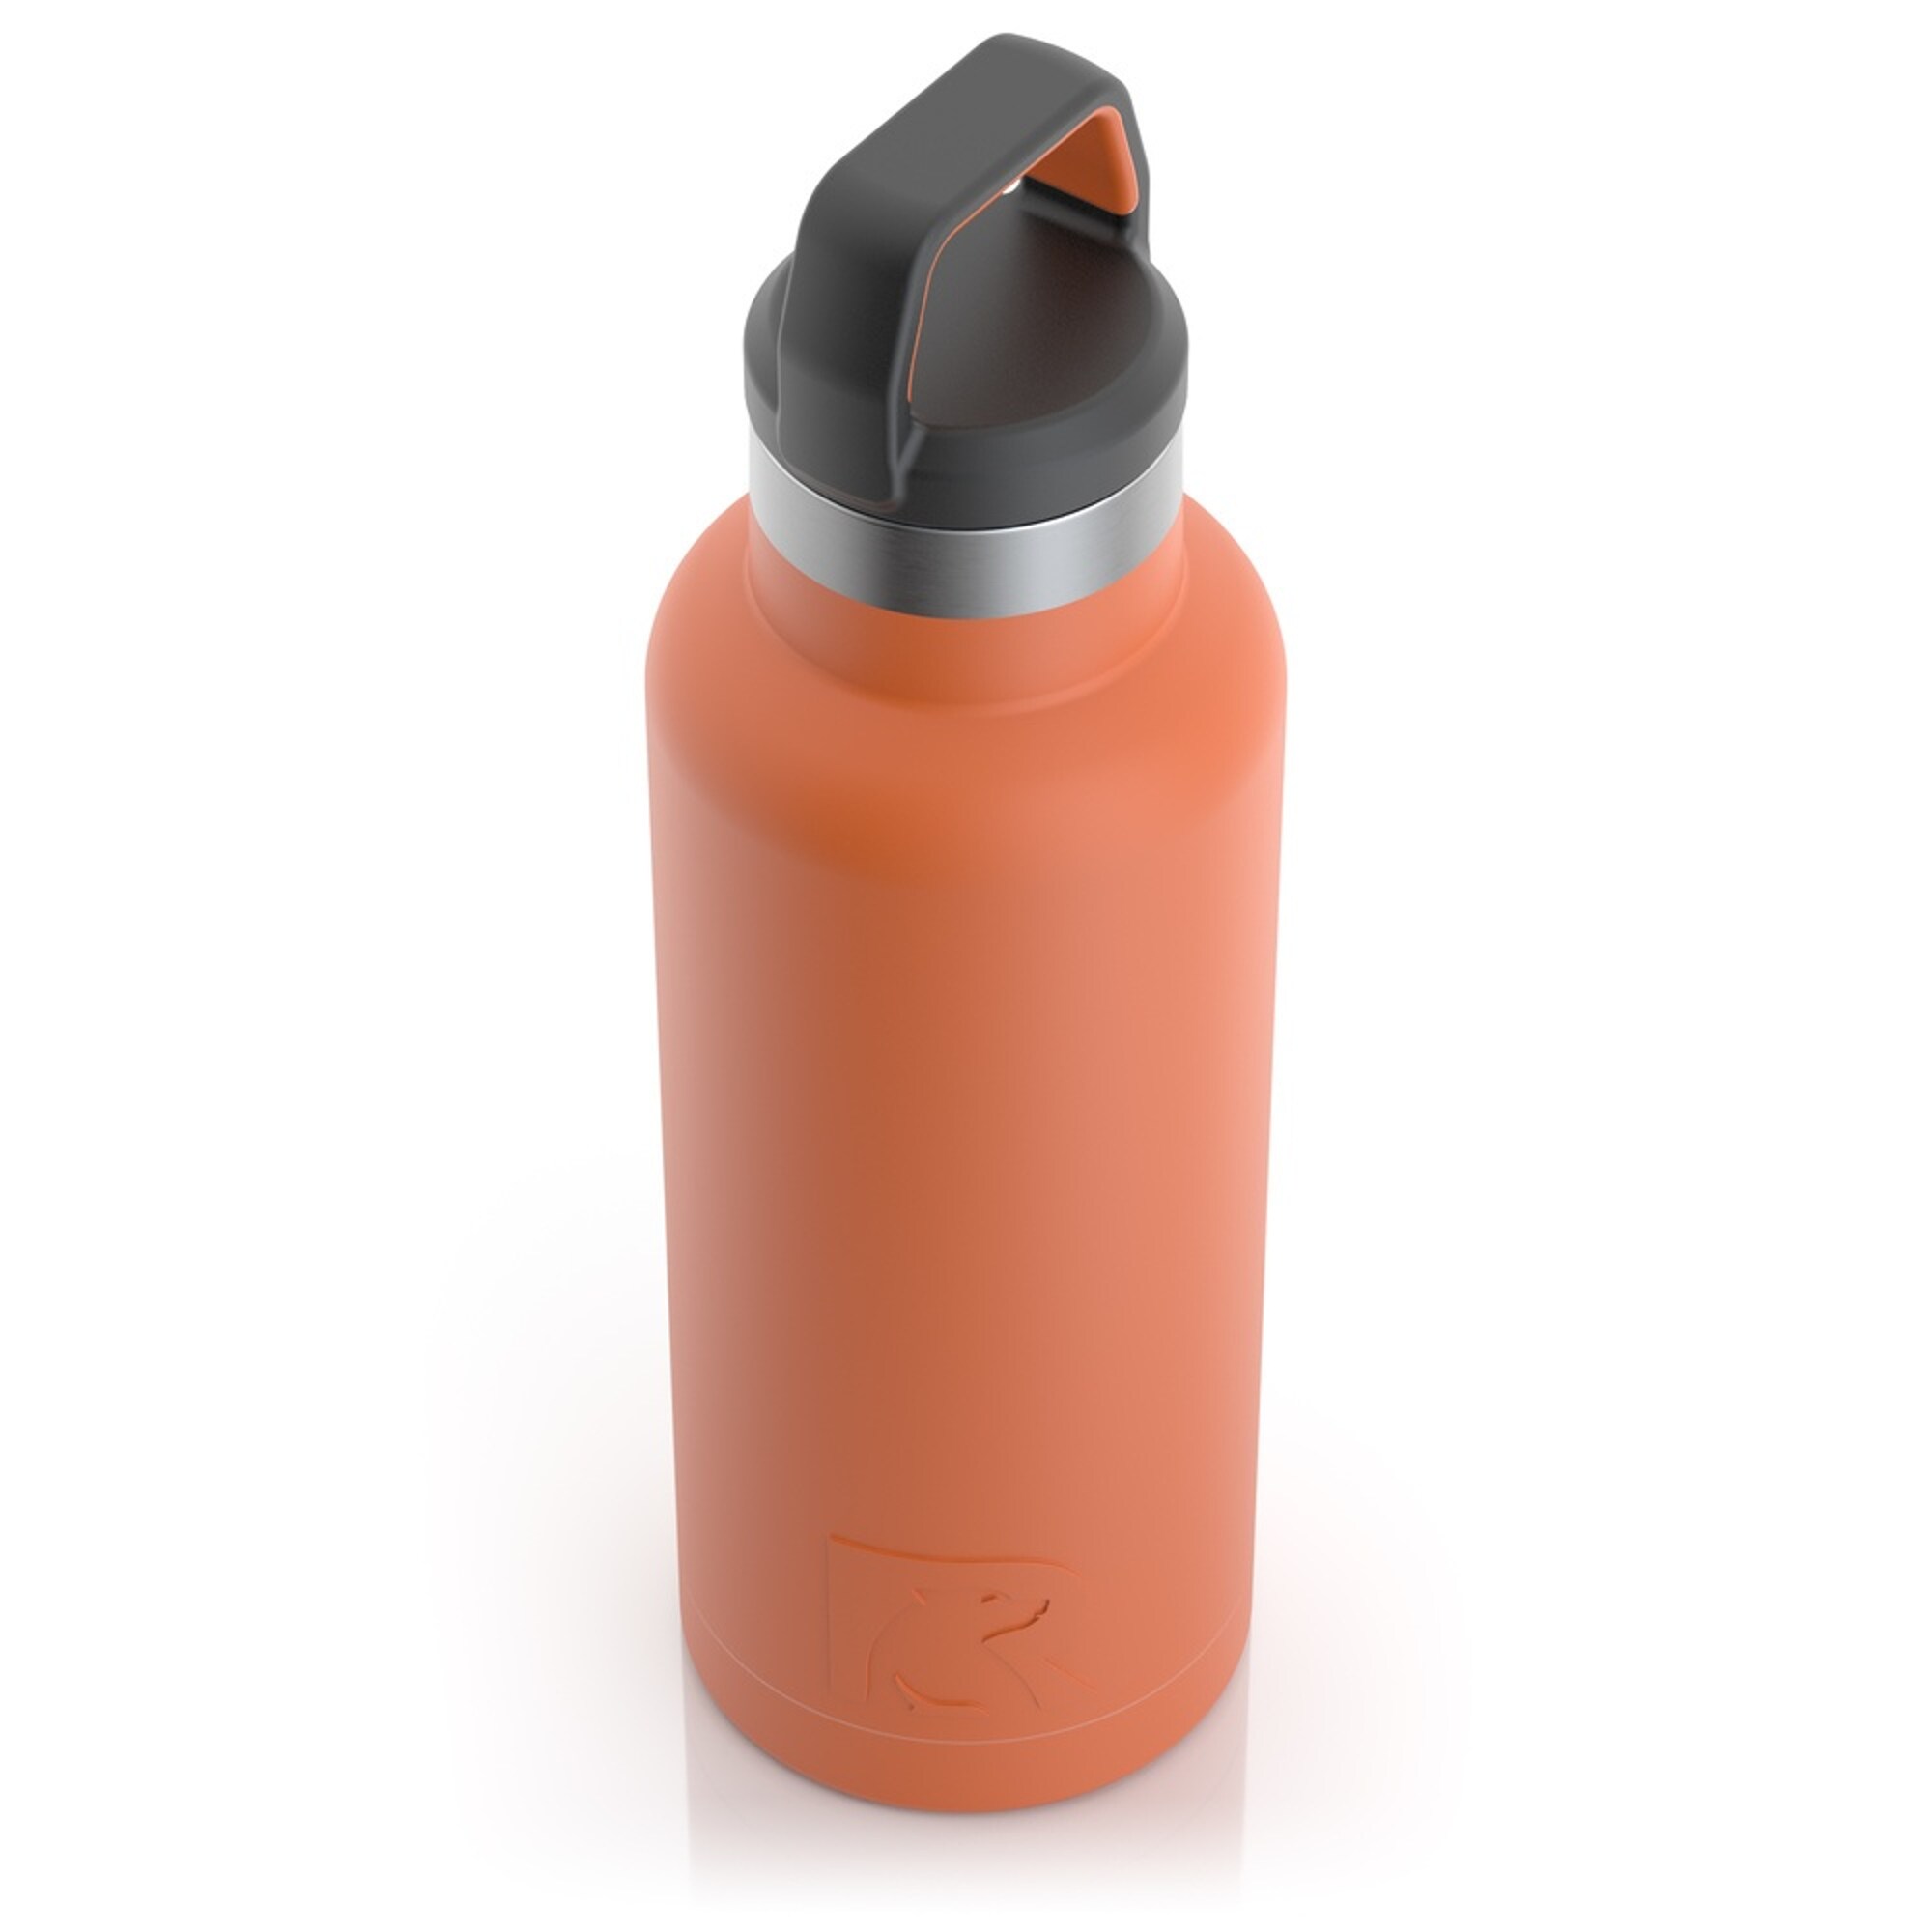 Stainless Steel Insulated Water Bottle With Straw&Lid Large